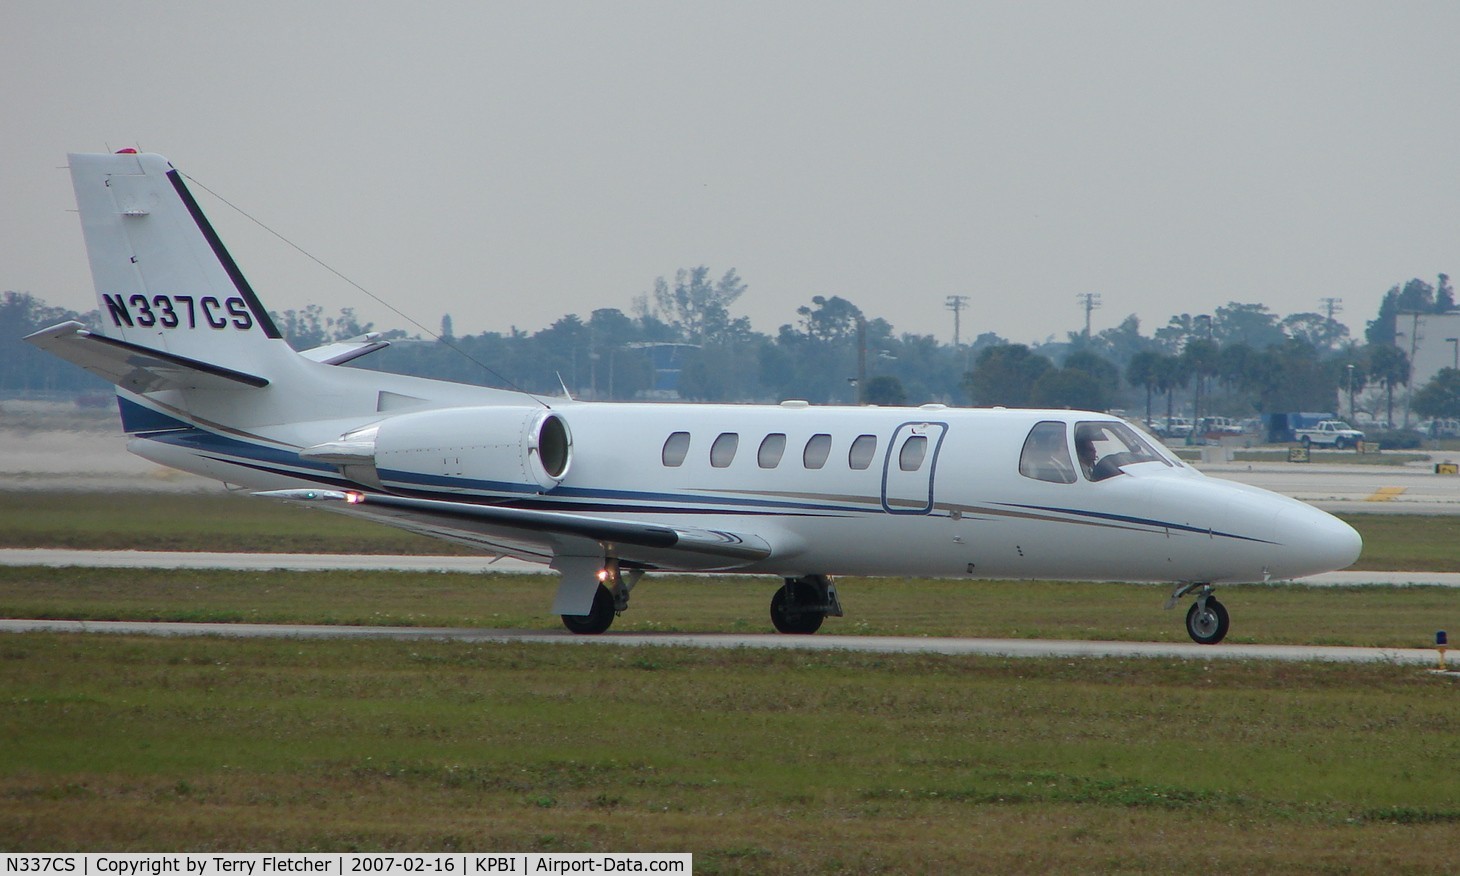 N337CS, 2004 Cessna 550 Citation Bravo C/N 550-1097, part of the Friday afternoon arrivals 'rush' at PBI